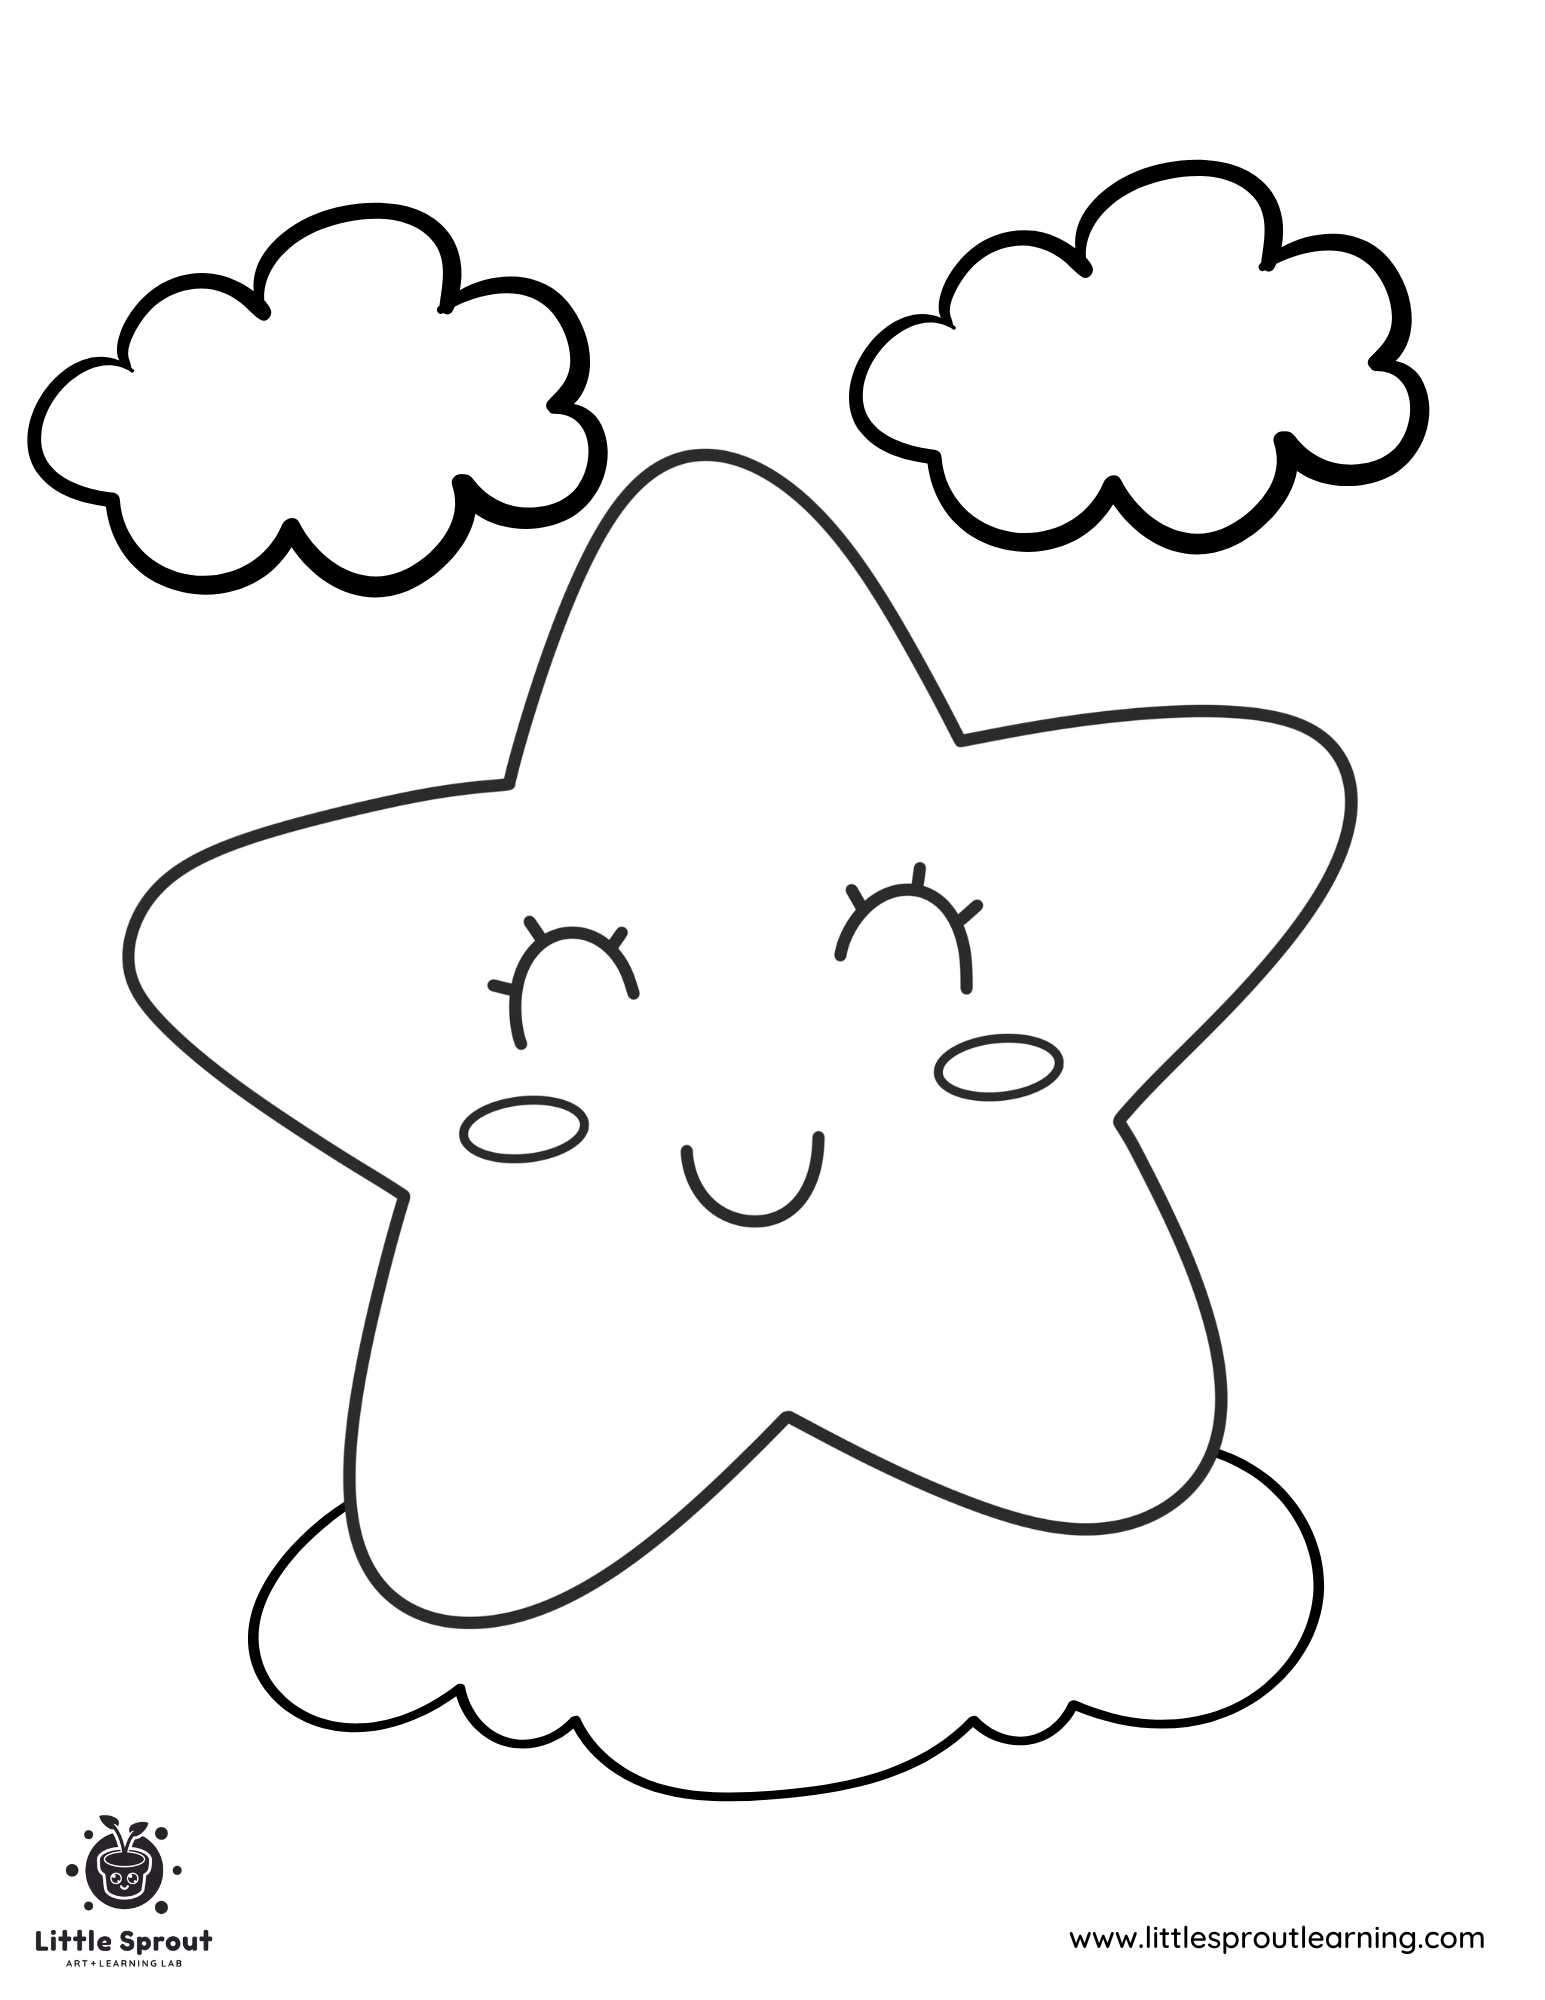 Smiling Star on Cloud Coloring Page